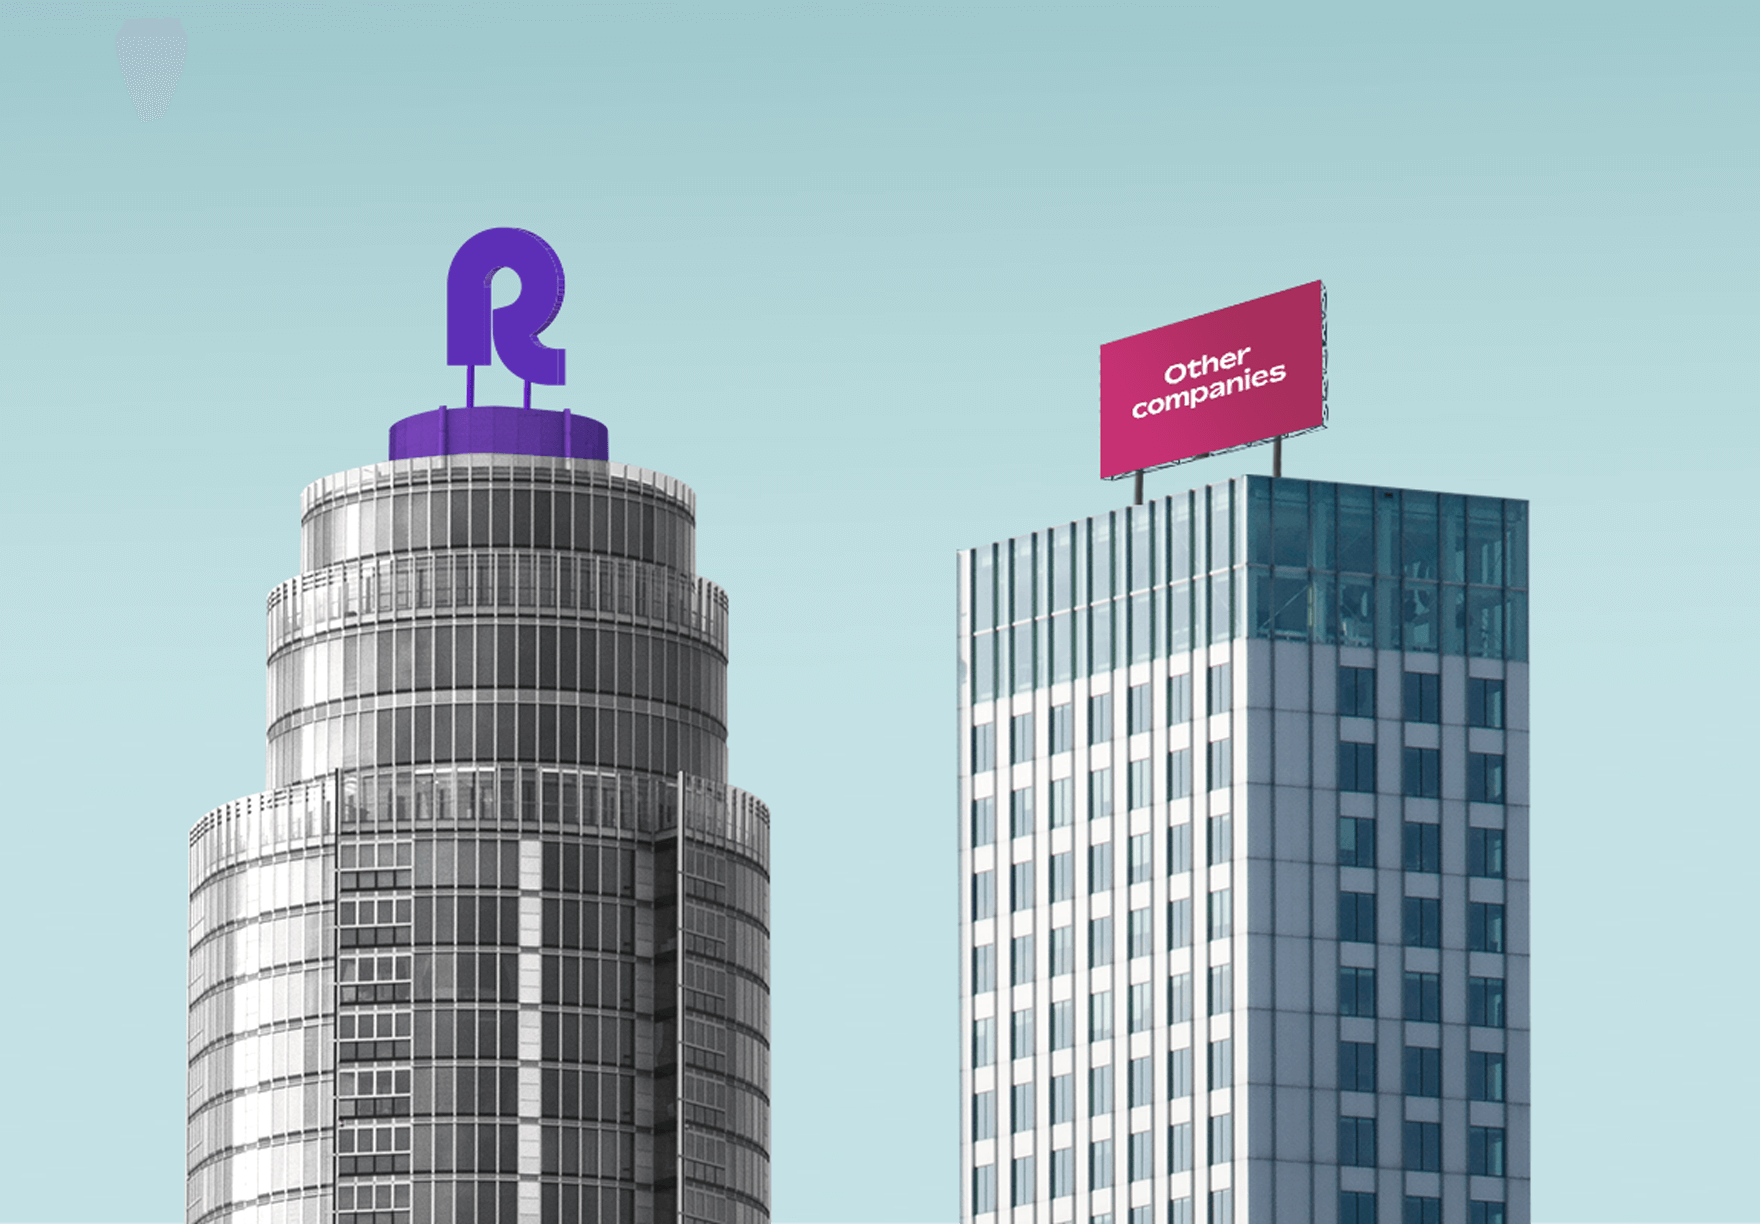 Remote's sleek HQ stands tall above the rest by owning our entire global infrastructure